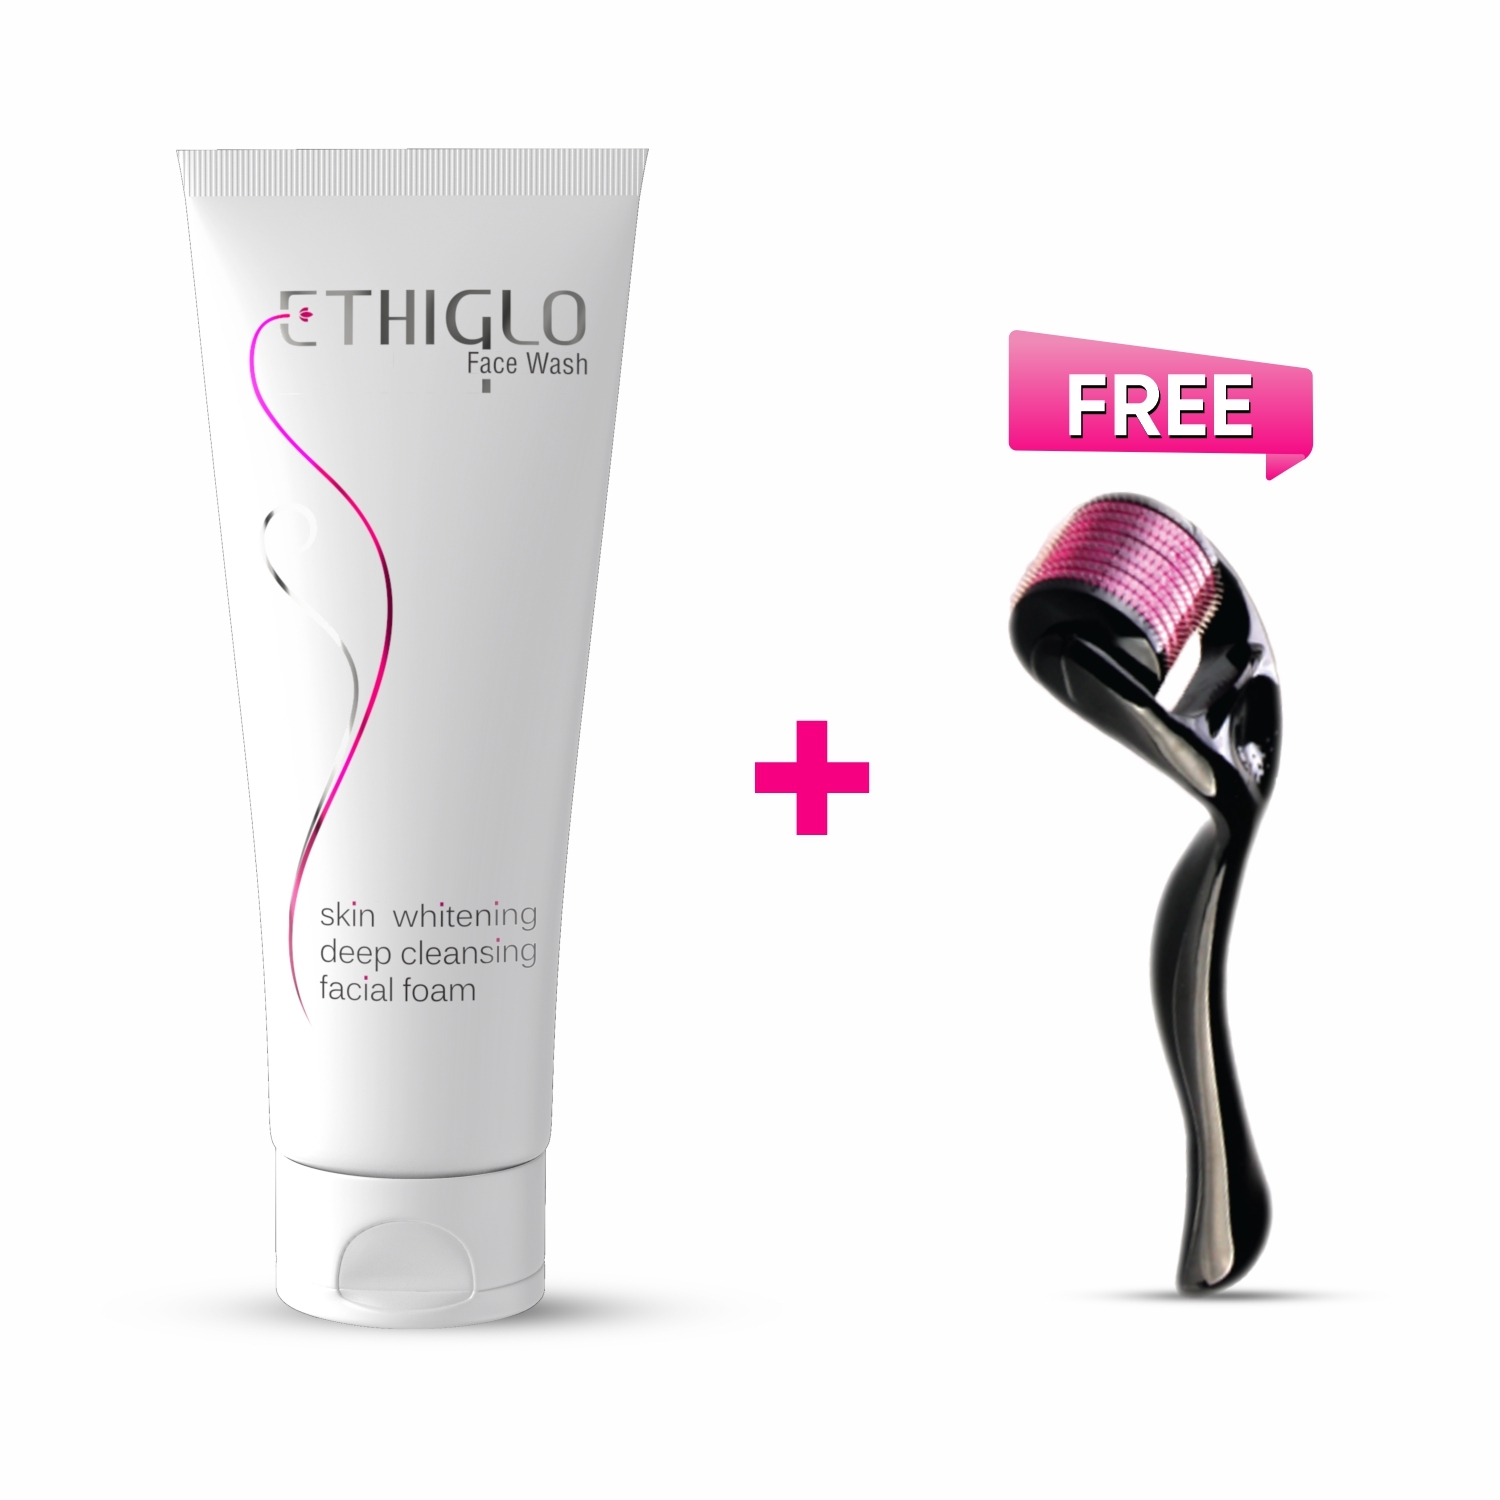 EMM | Ethiglo Skin Whitening and Deep Cleaninsing Face wash with Free Derma Roller